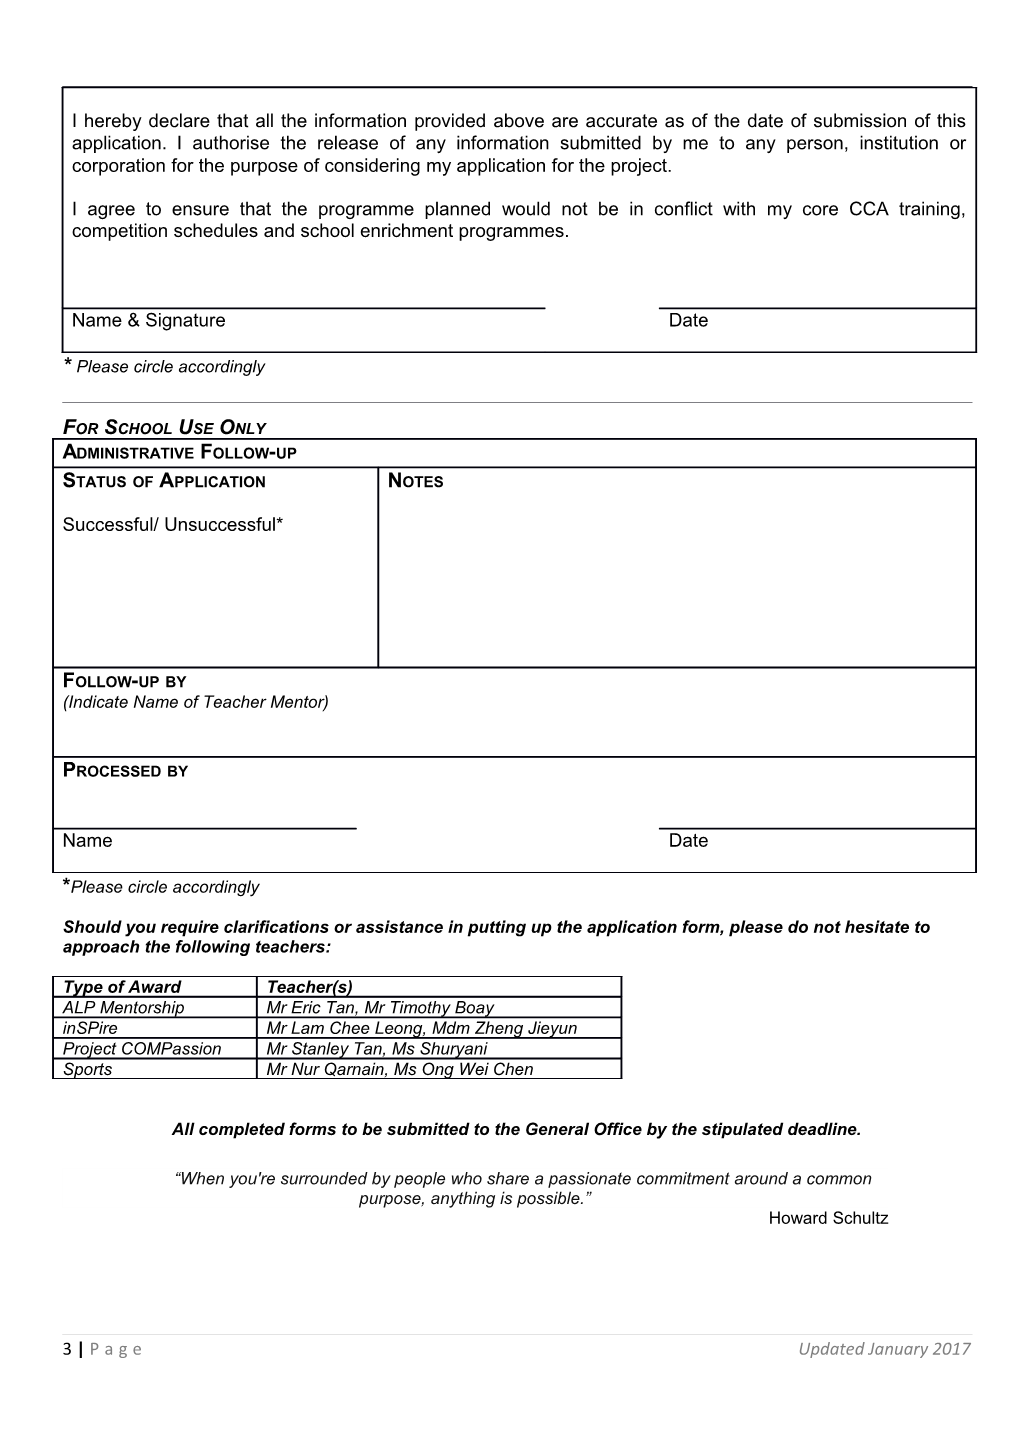 Application for School and SAC Sponsored Awards